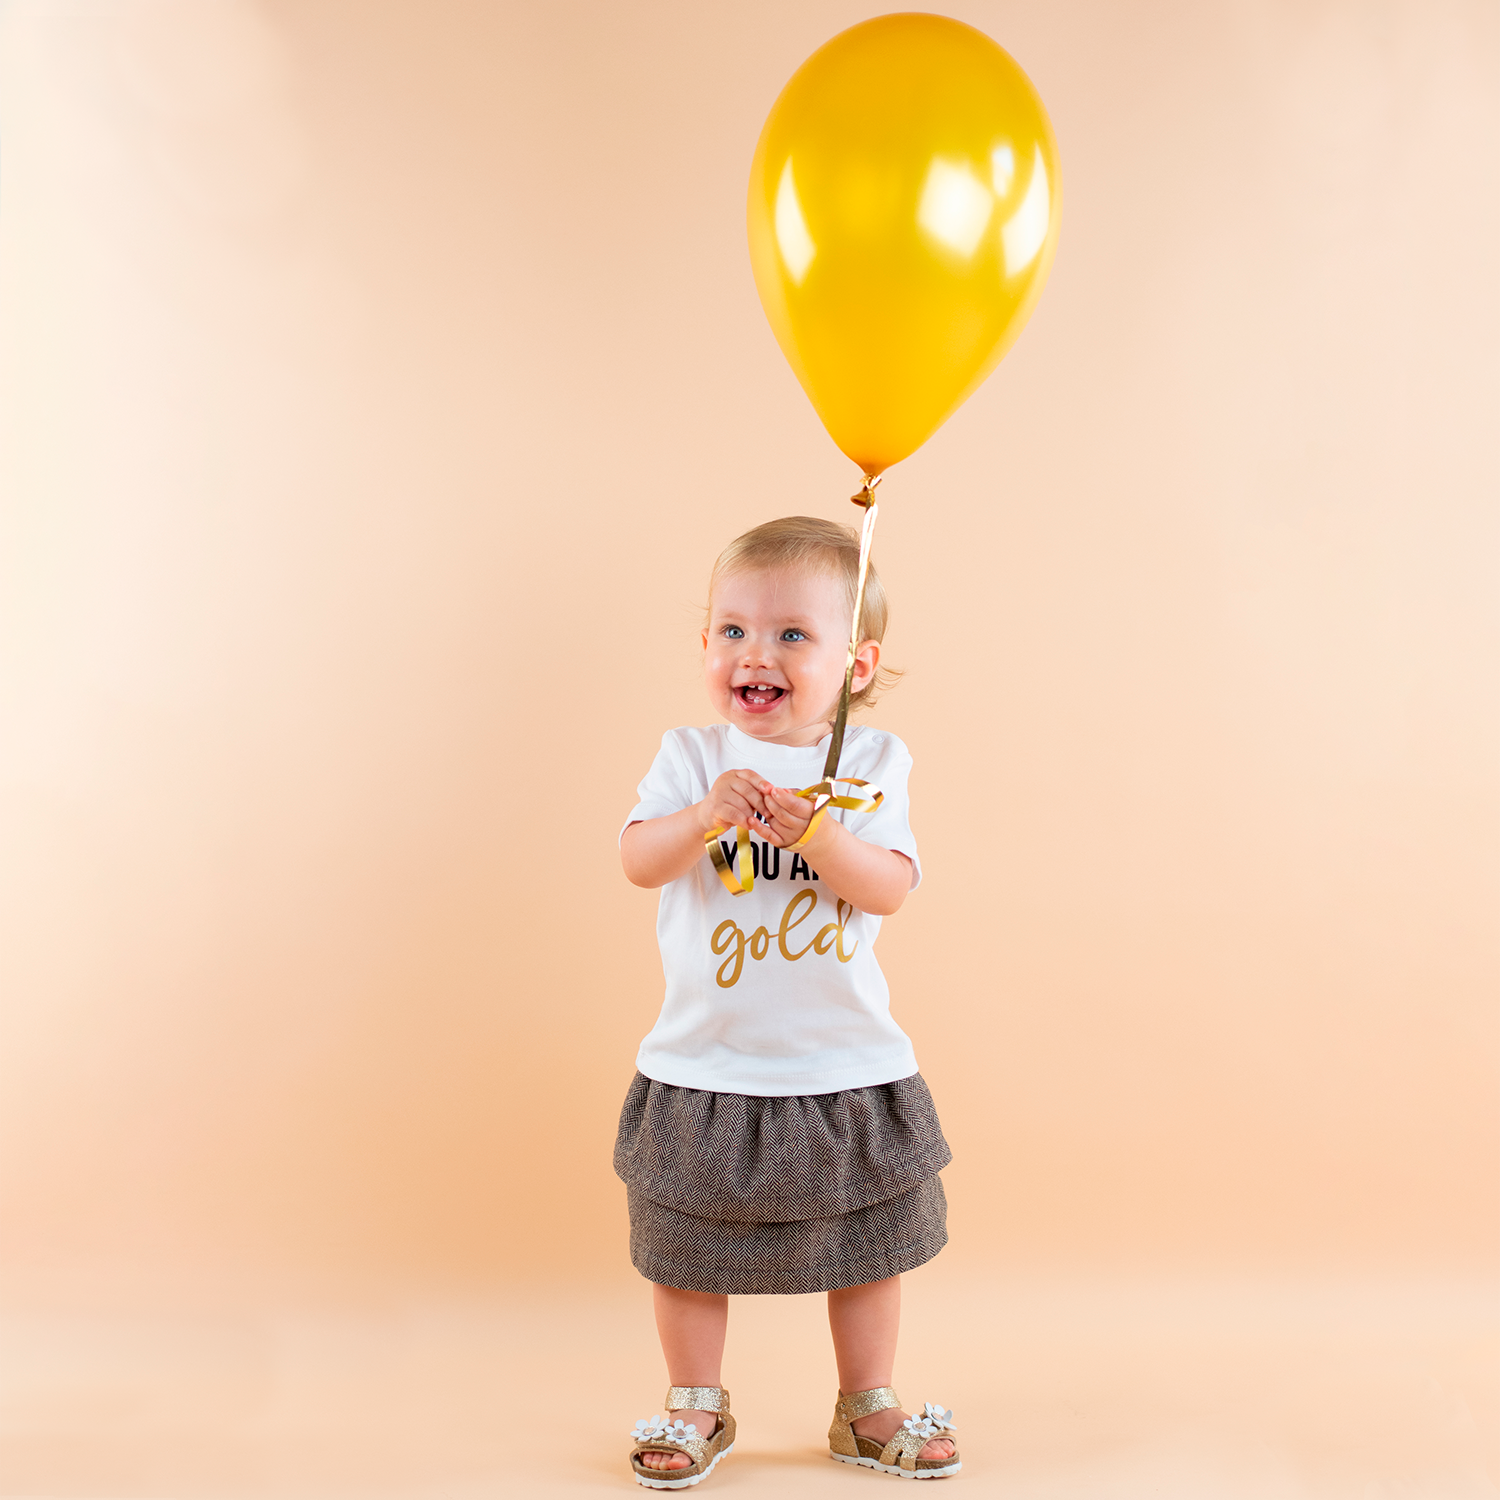 'Baby you are gold' baby shortsleeve shirt